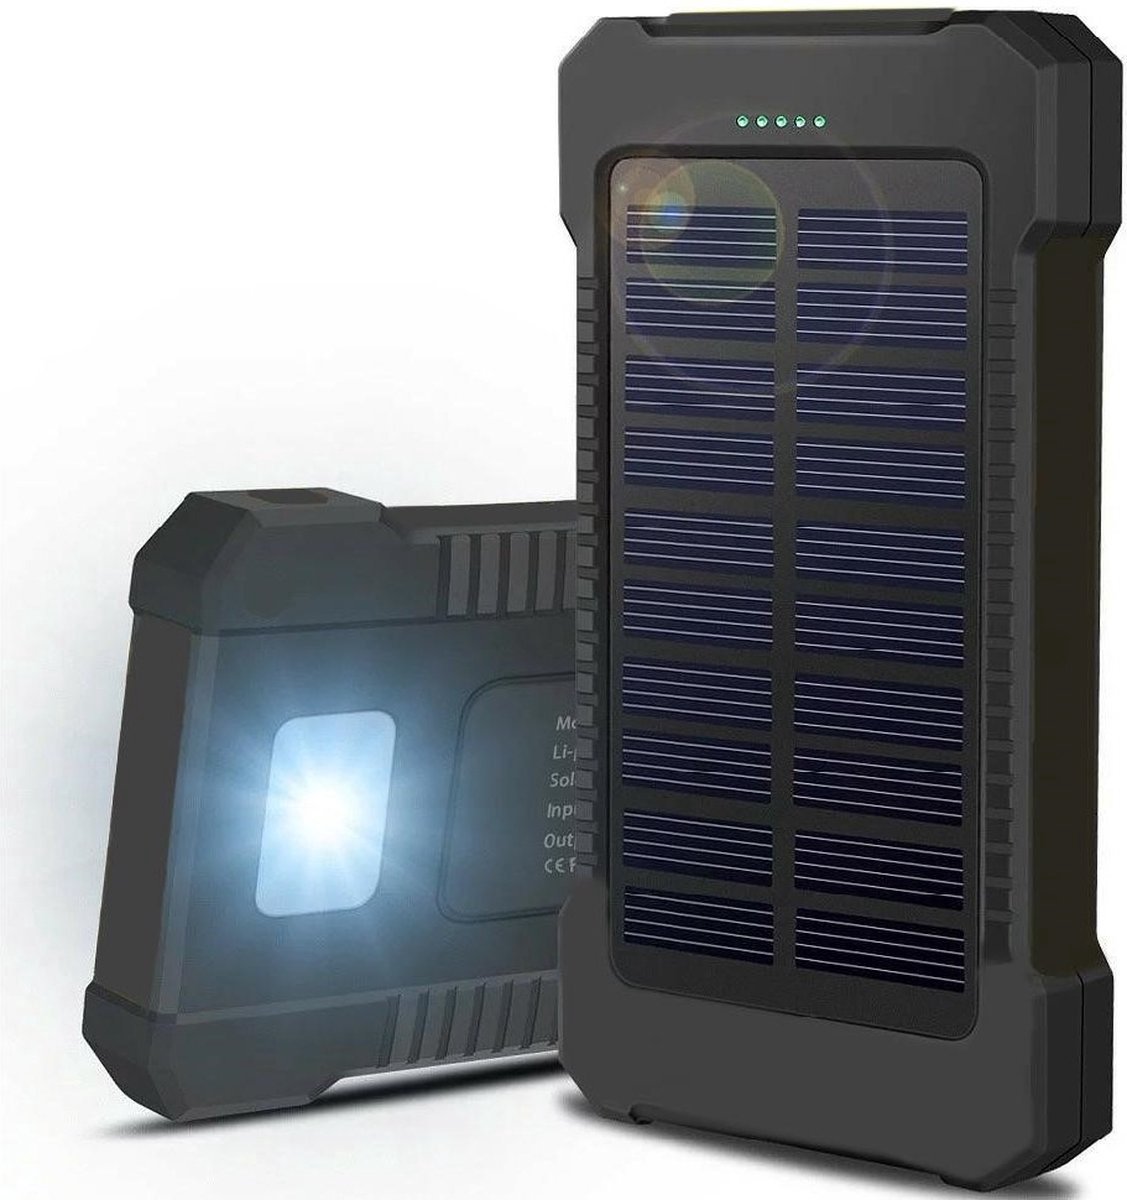 Solar charger - Powerbank - Oplader - 20.000mAh - Zonne-energie - Incl LED verlichting - Kompas - Zwart - 2x USB Output